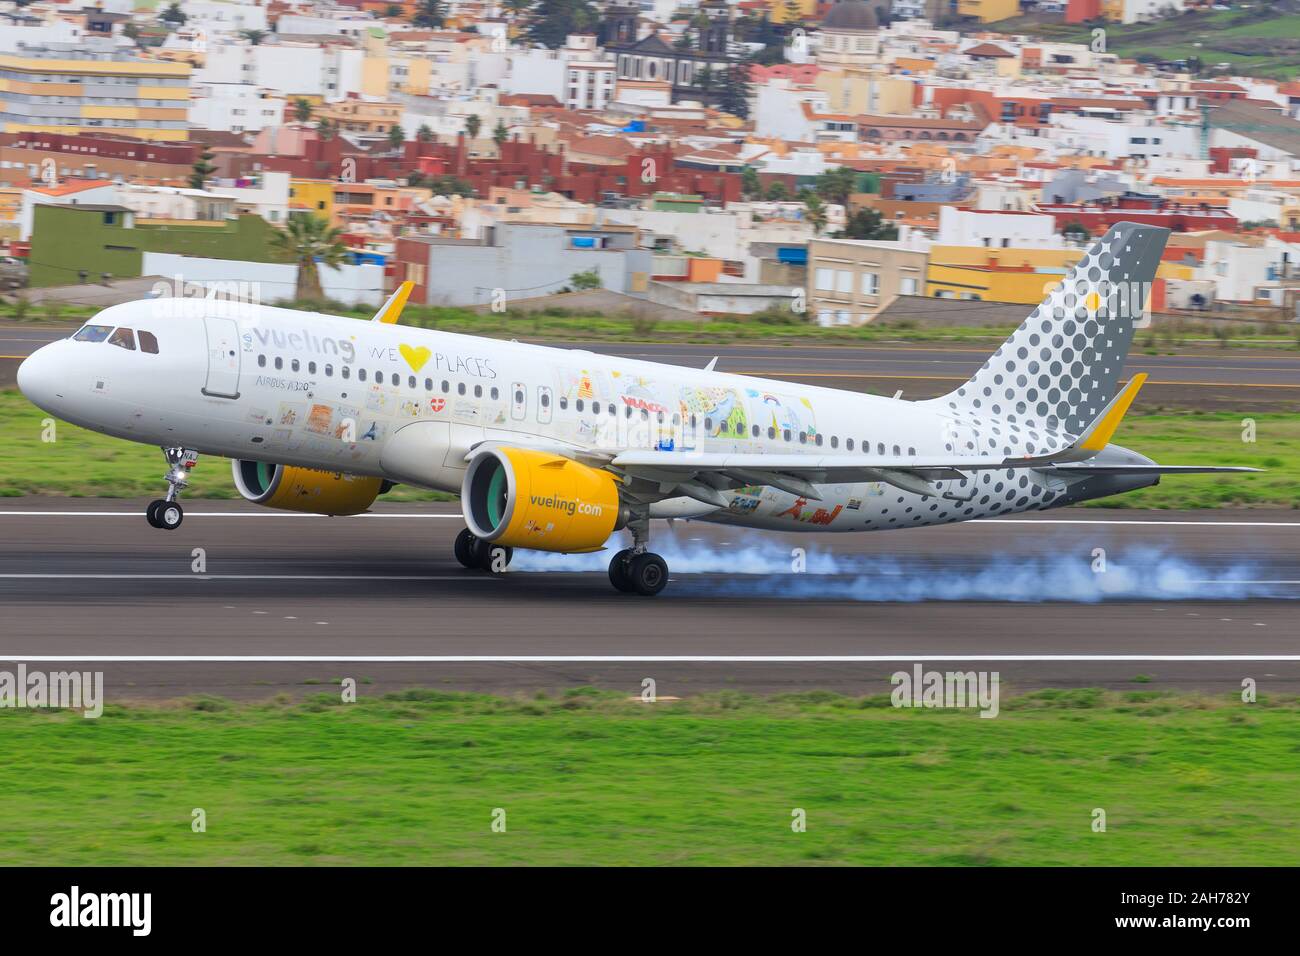 Tenerife, Canary Island, Spain - November 24th, 2019: Vueling A320 approaching Tenerife North airport Stock Photo